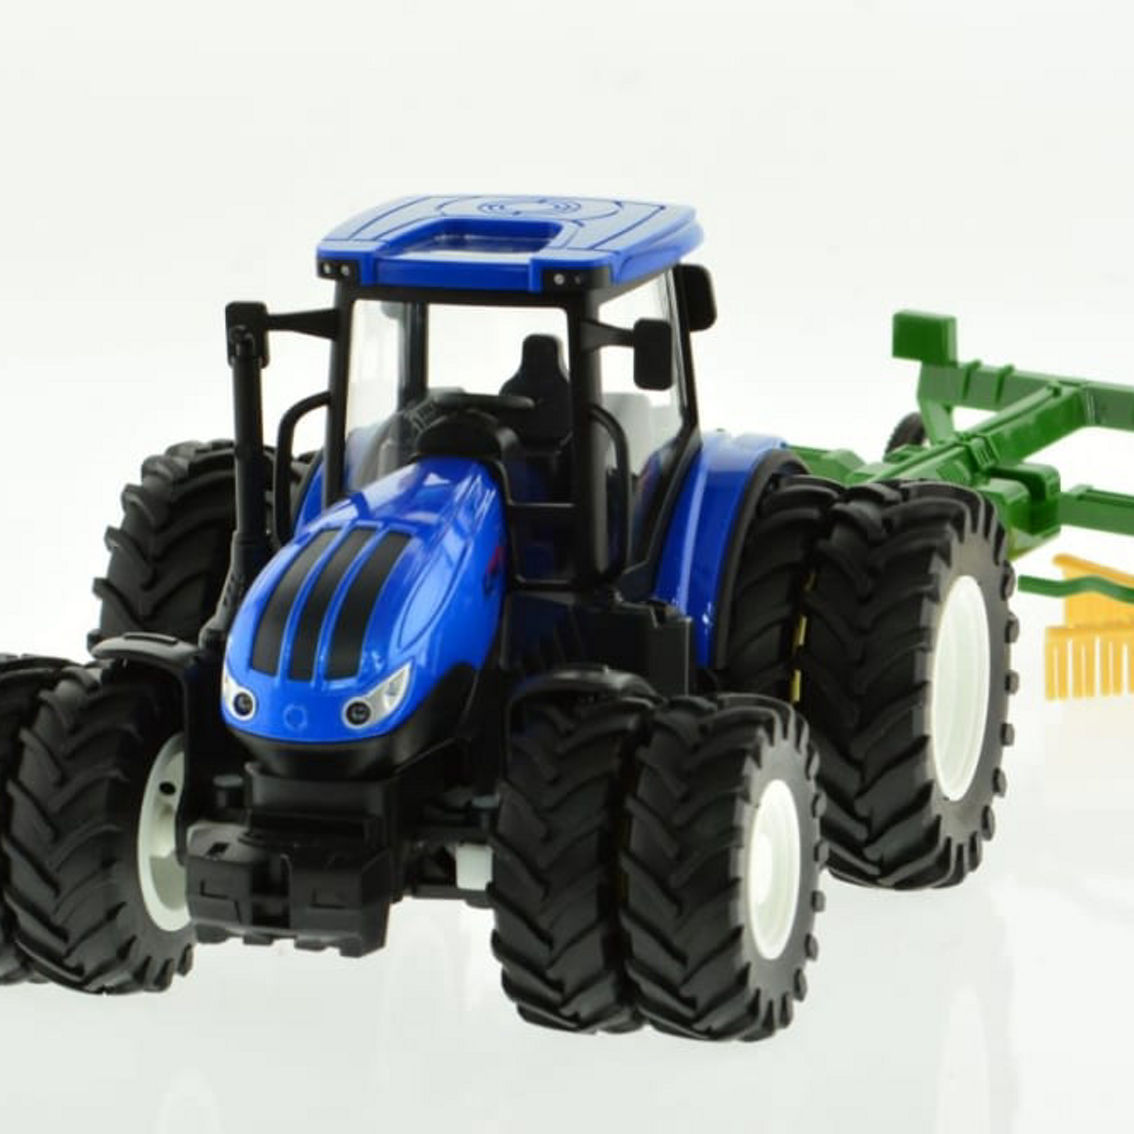 CIS-6637HB RC Farm Tractor 8 wheels with folding rake - Image 3 of 5